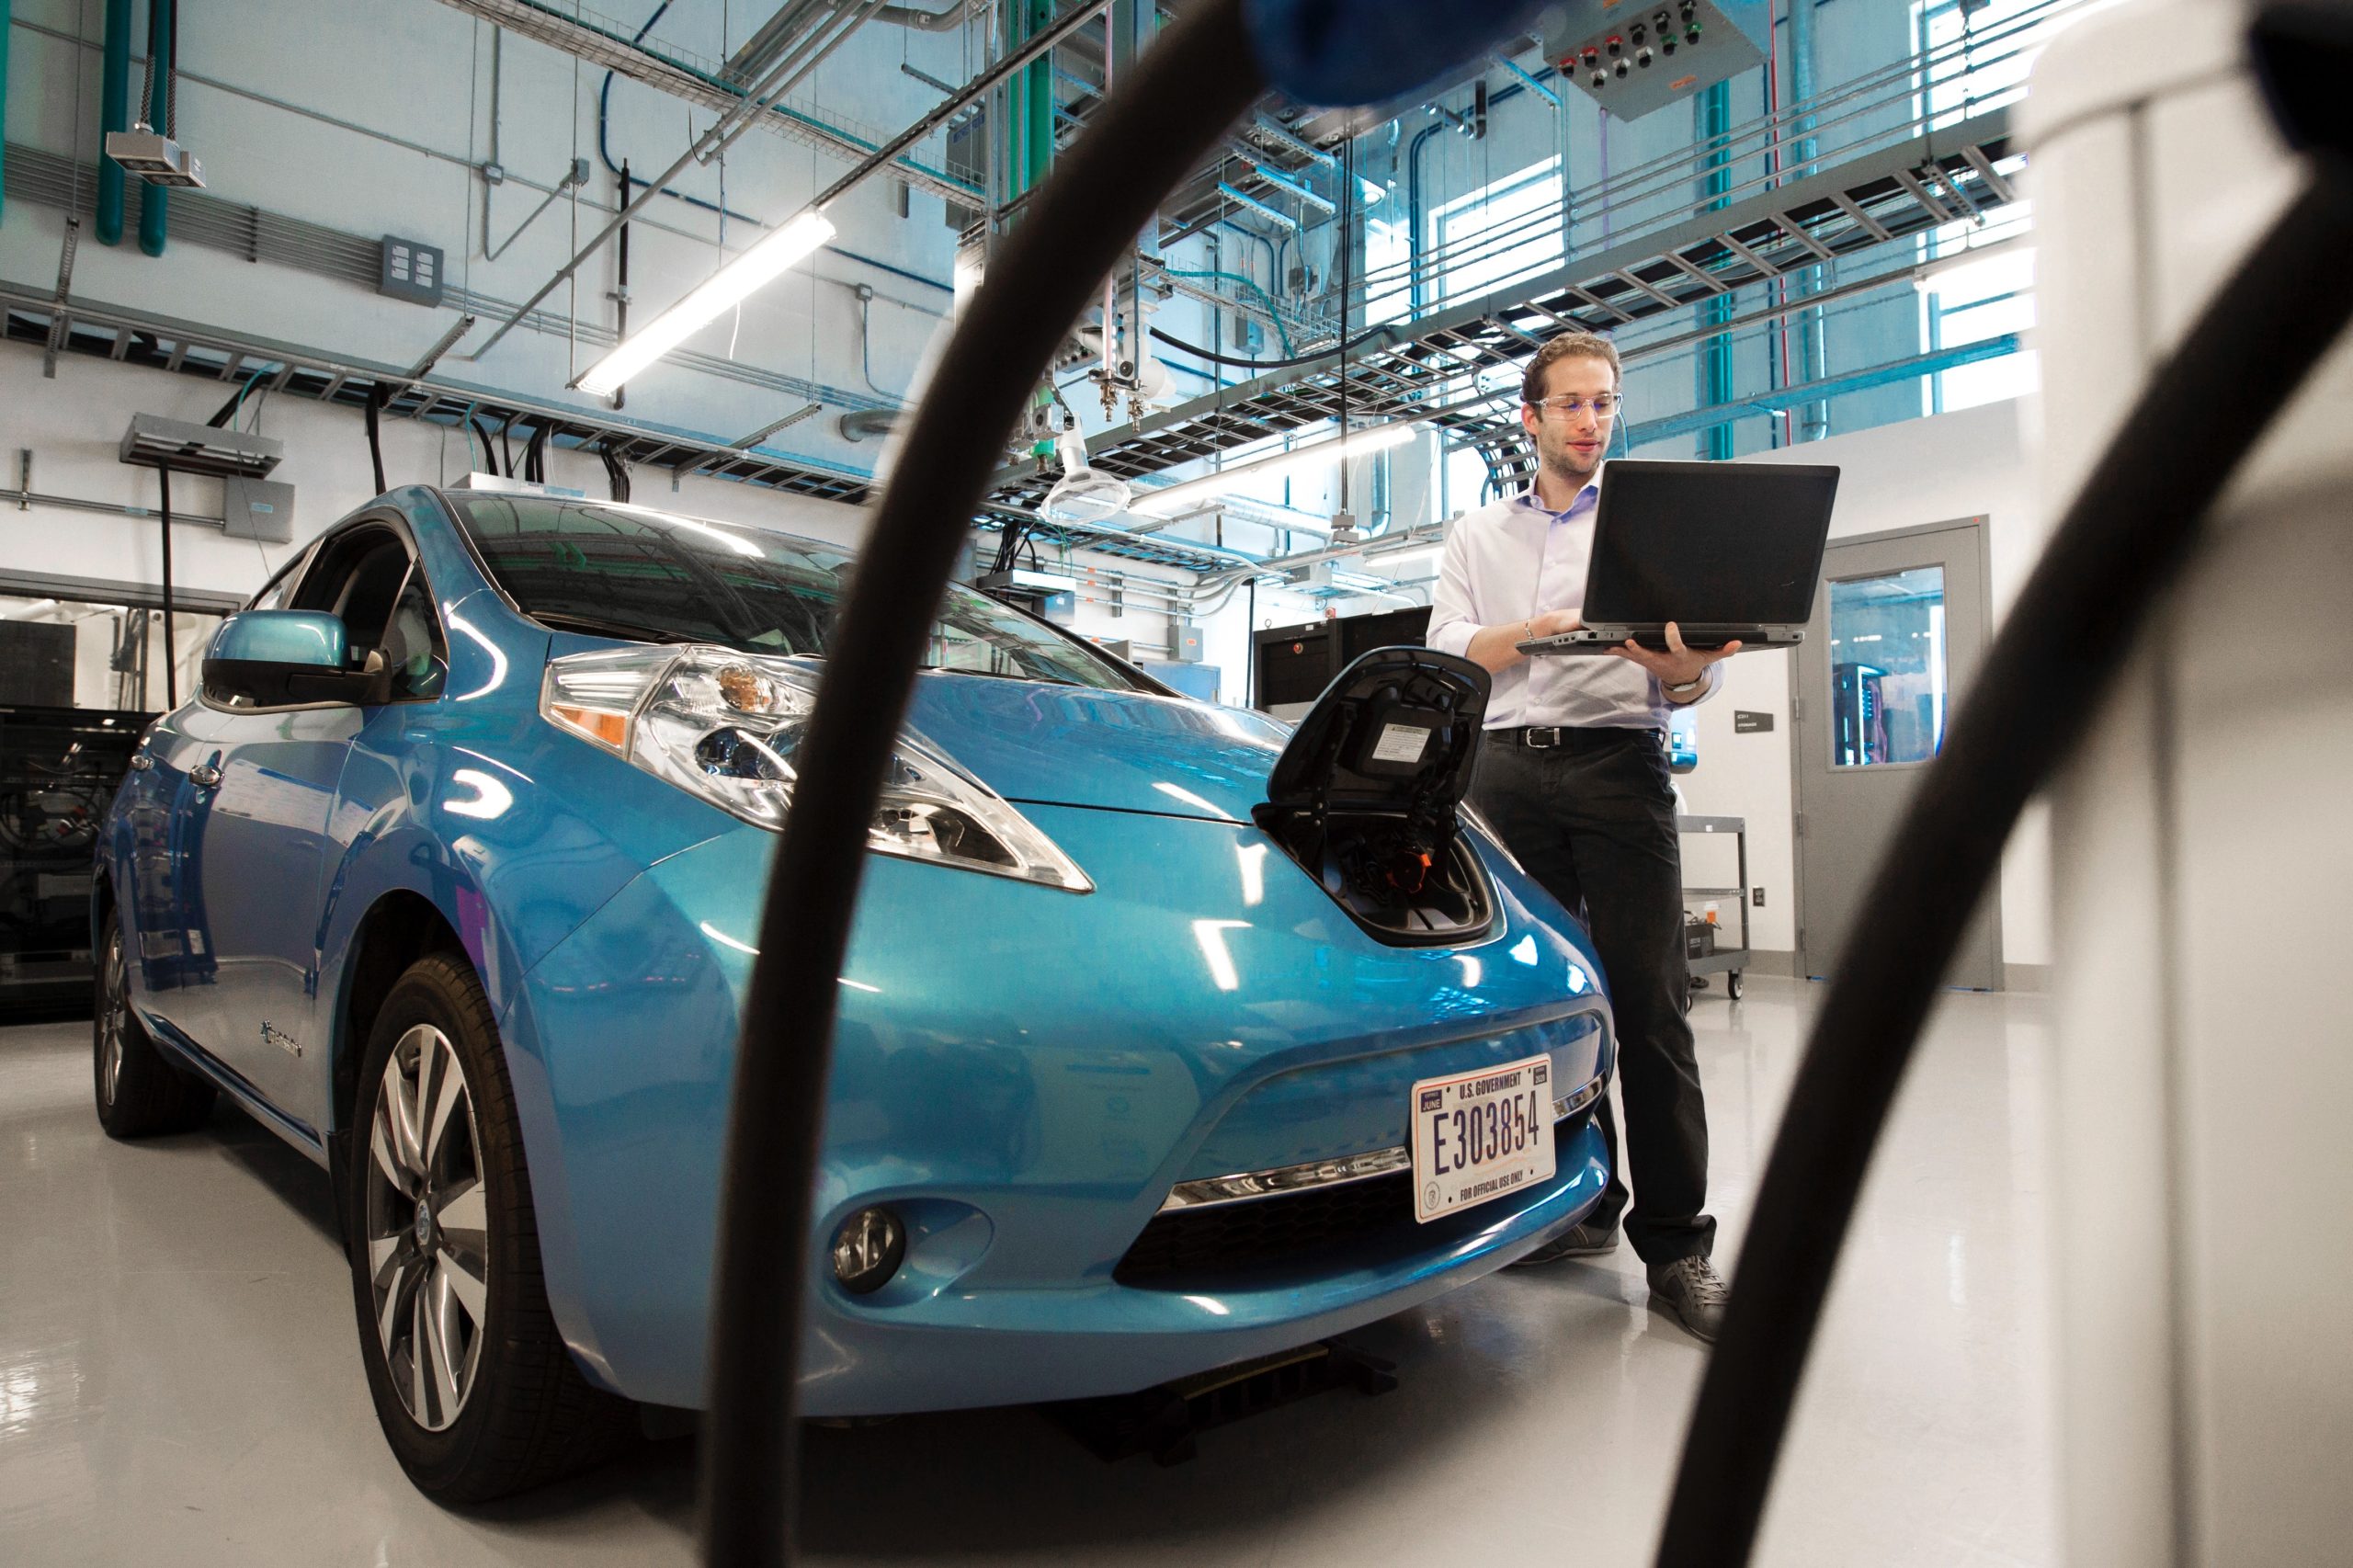 Cleantech news site editors on emerging utilities model: Keep an eye on electric vehicles